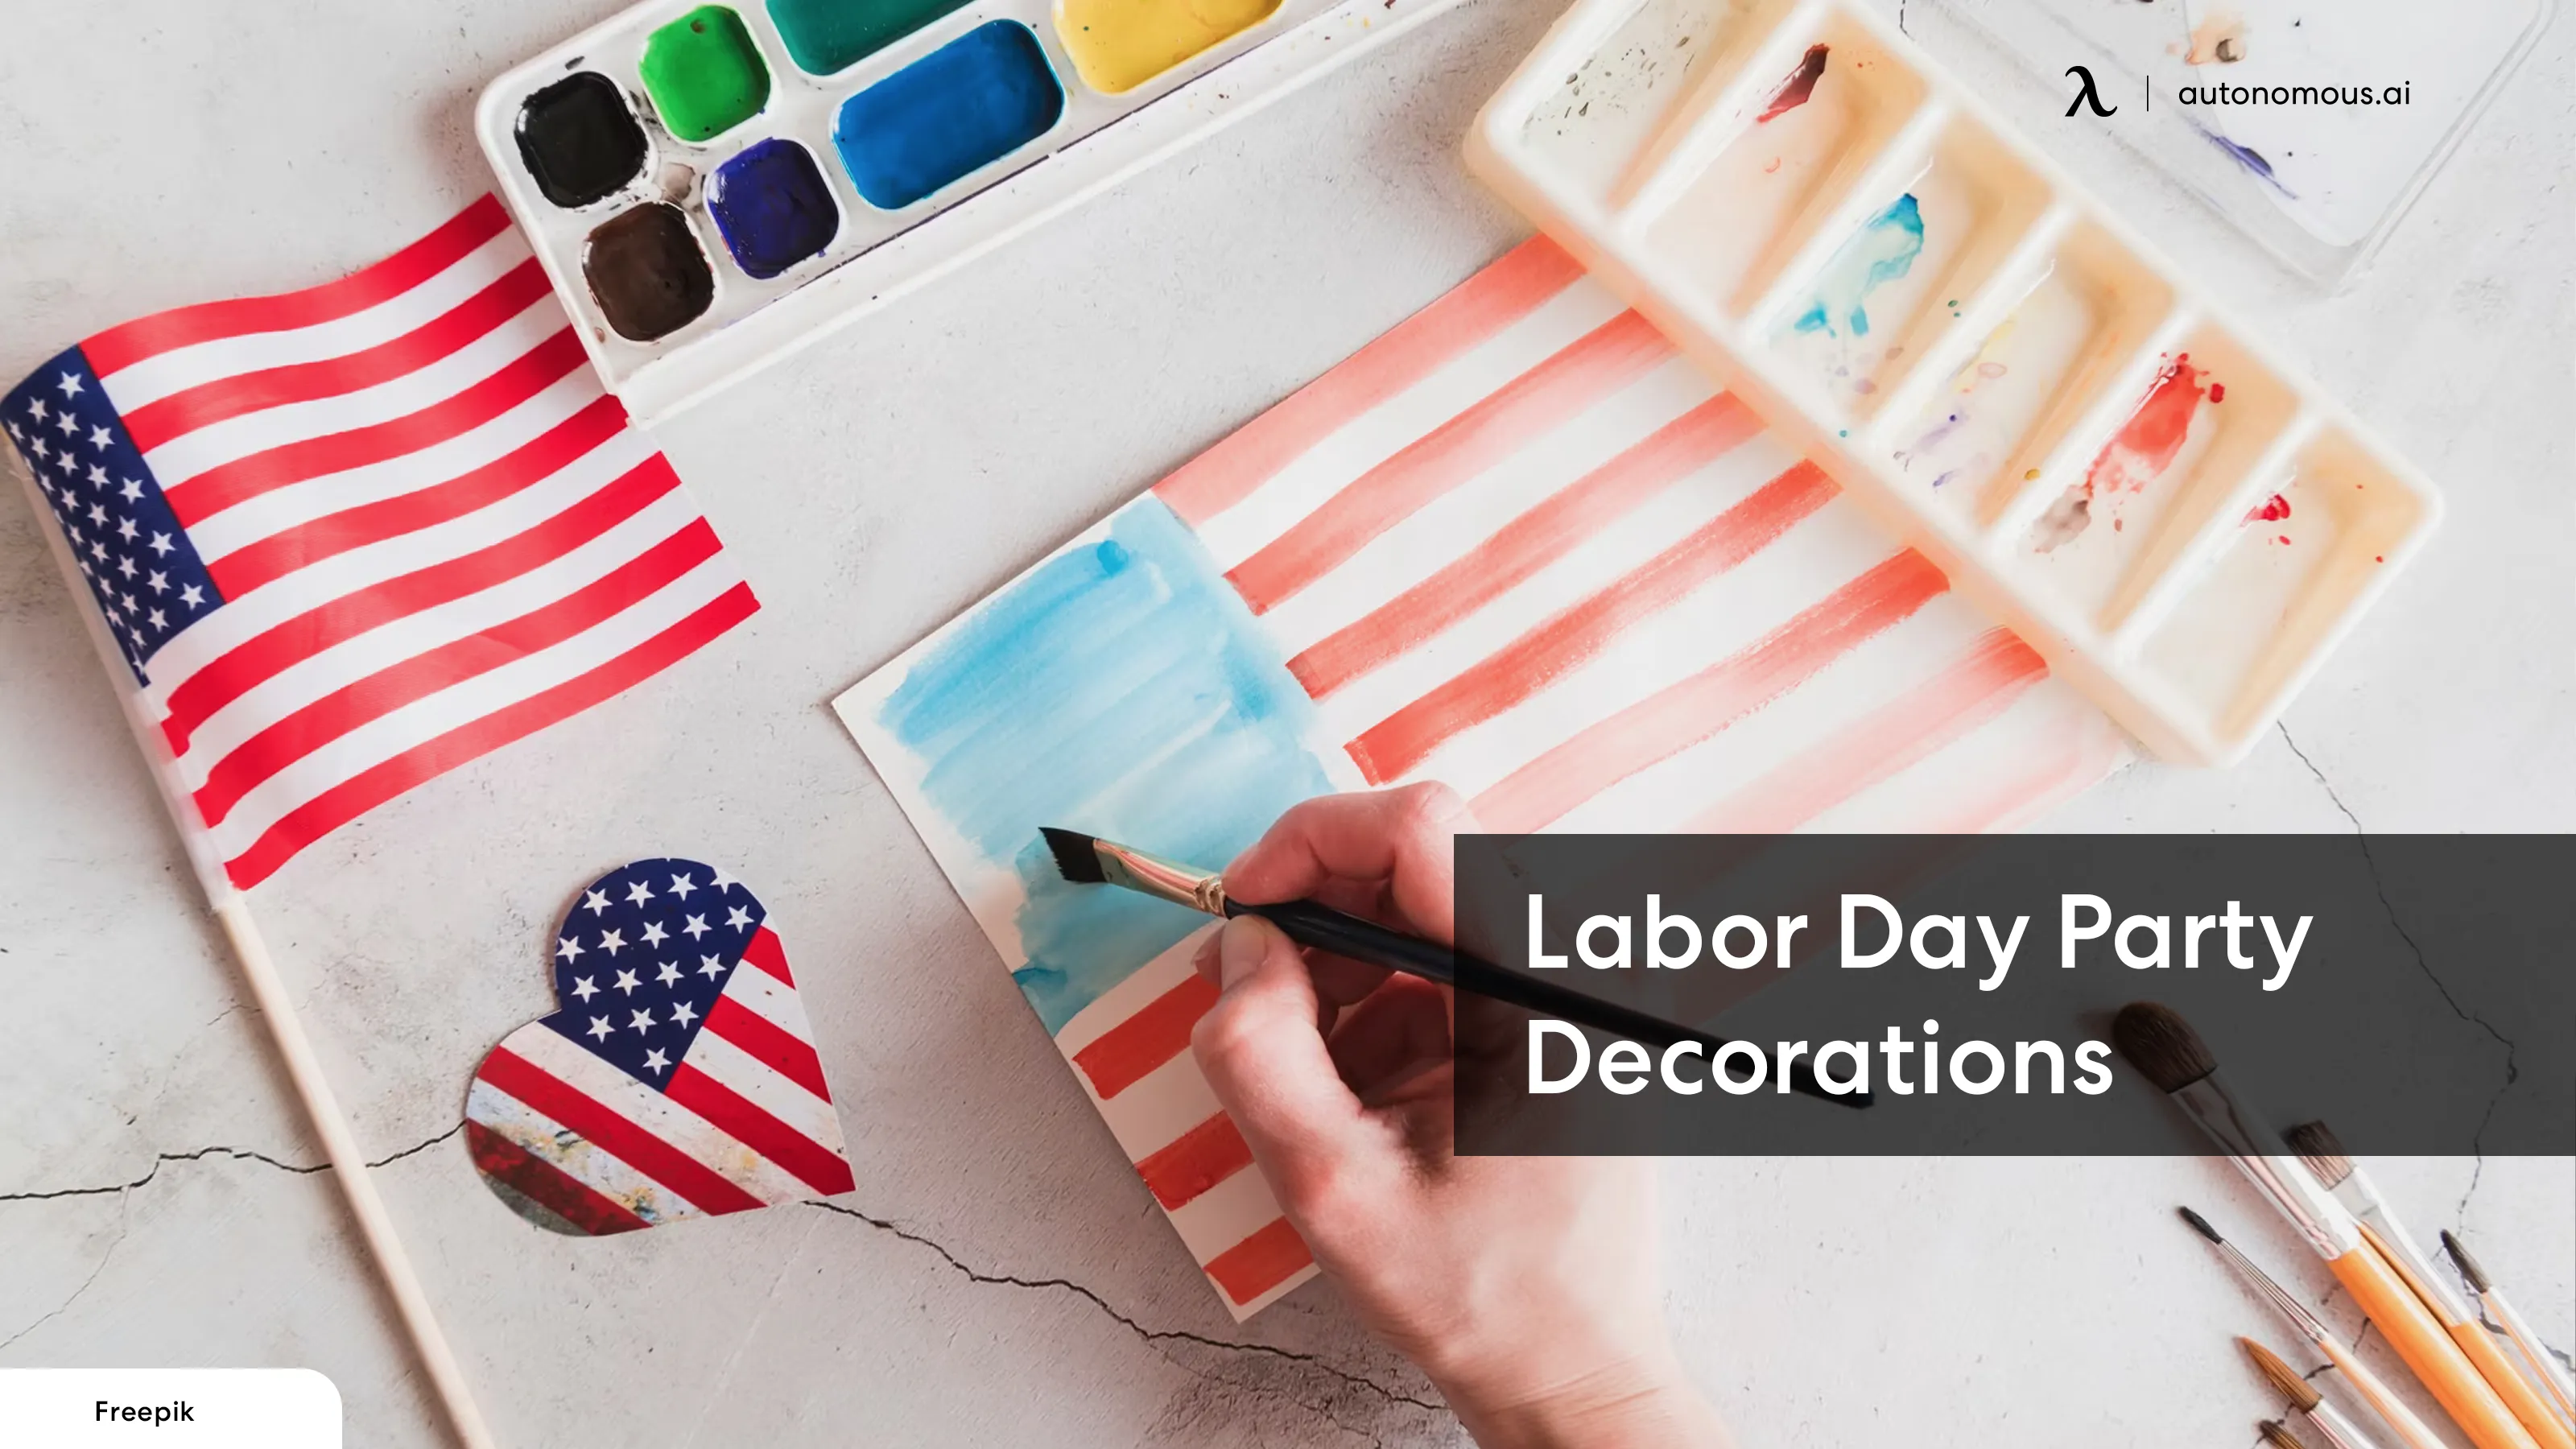 Decorating for Labor Day: Patriotic DIY Ideas and Inspirations